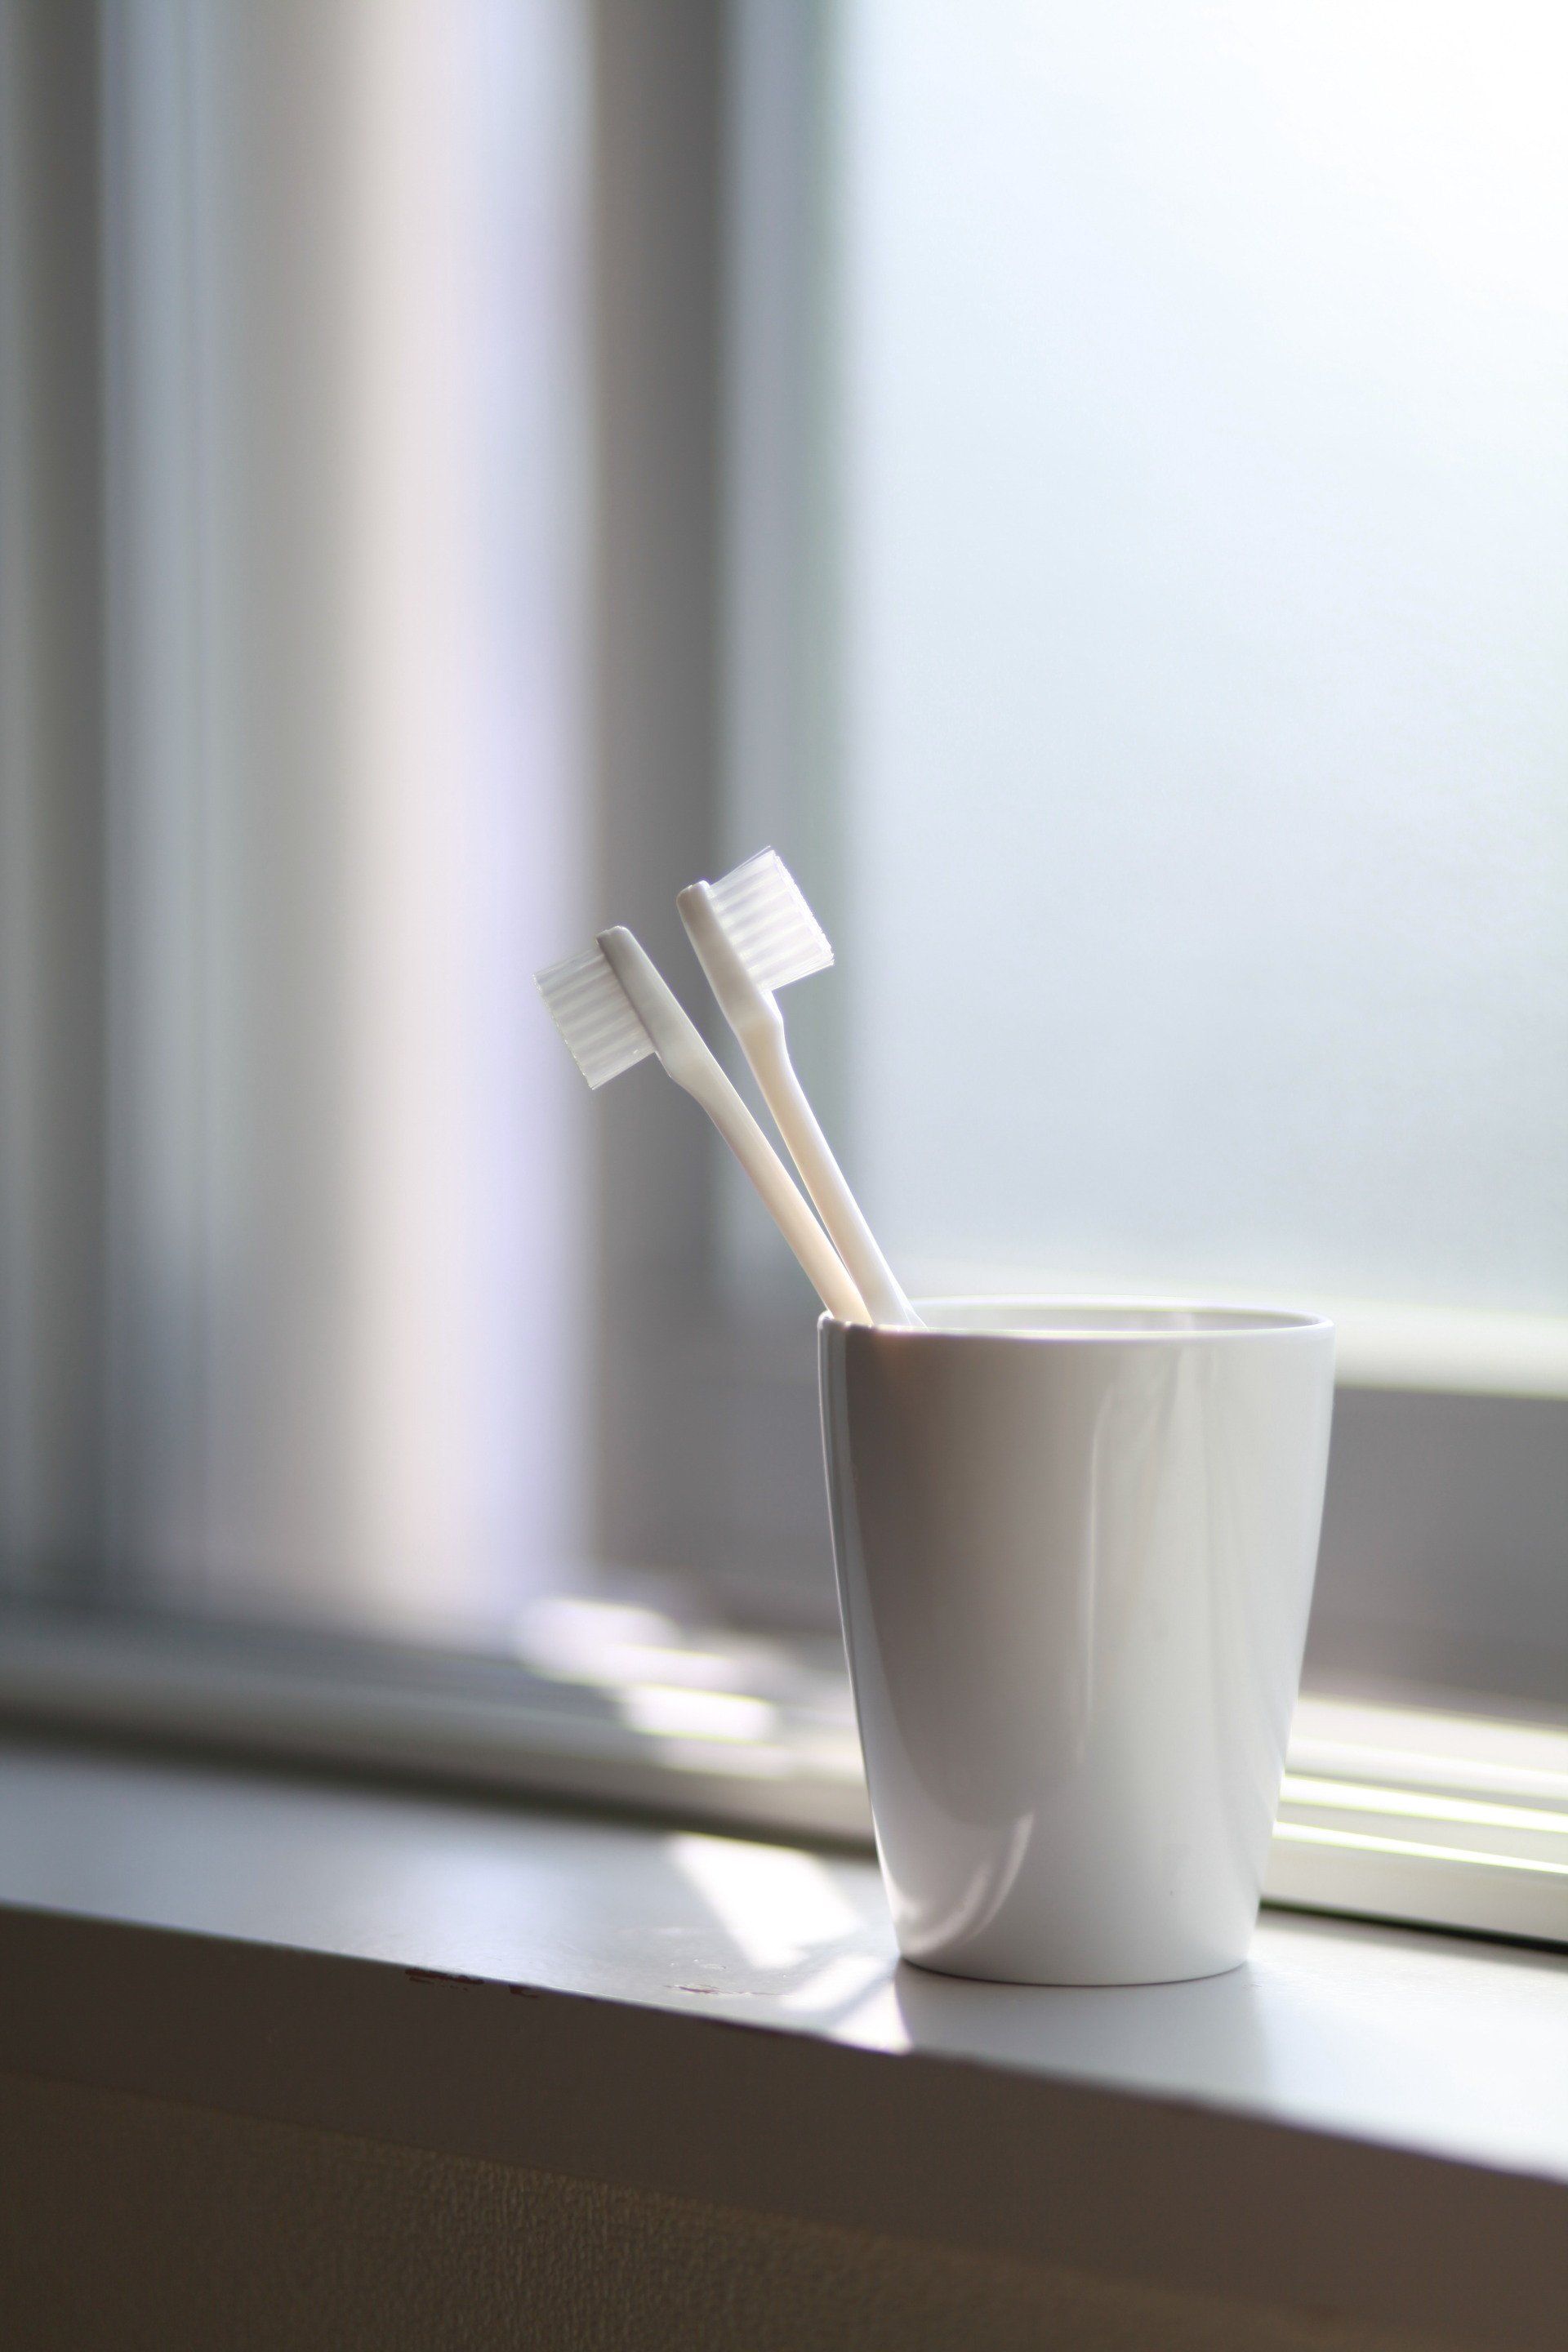 two toothbrushes are in a cup on a window sill .